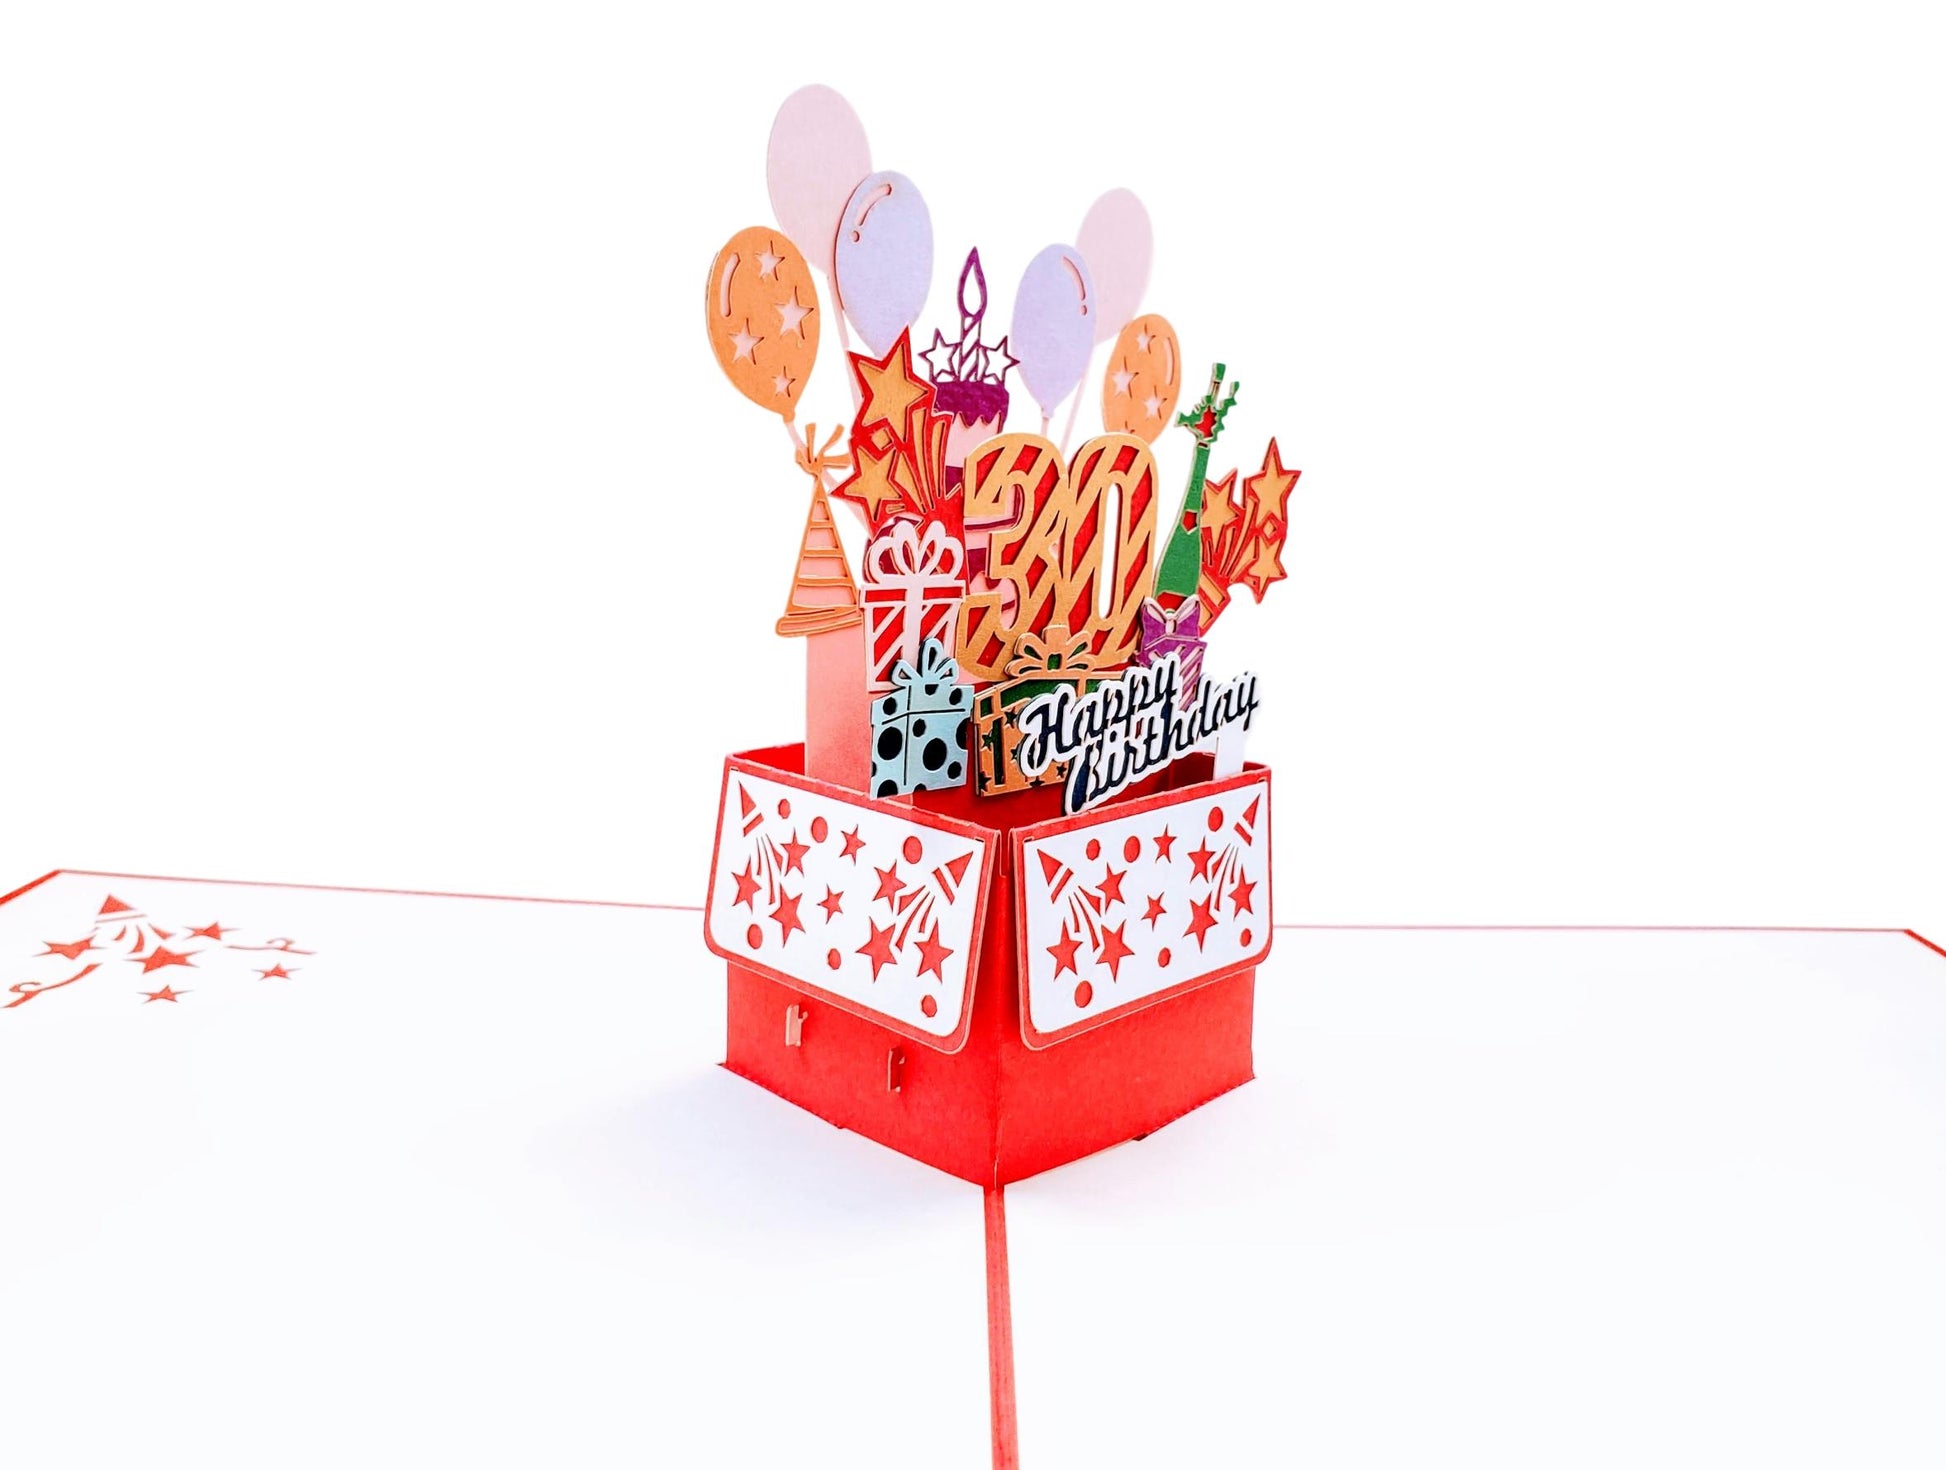 Happy 30th Birthday Red Party Box 3D Pop Up Greeting Card - Awesome - Balloons - Birthday - Congratu - iGifts And Cards